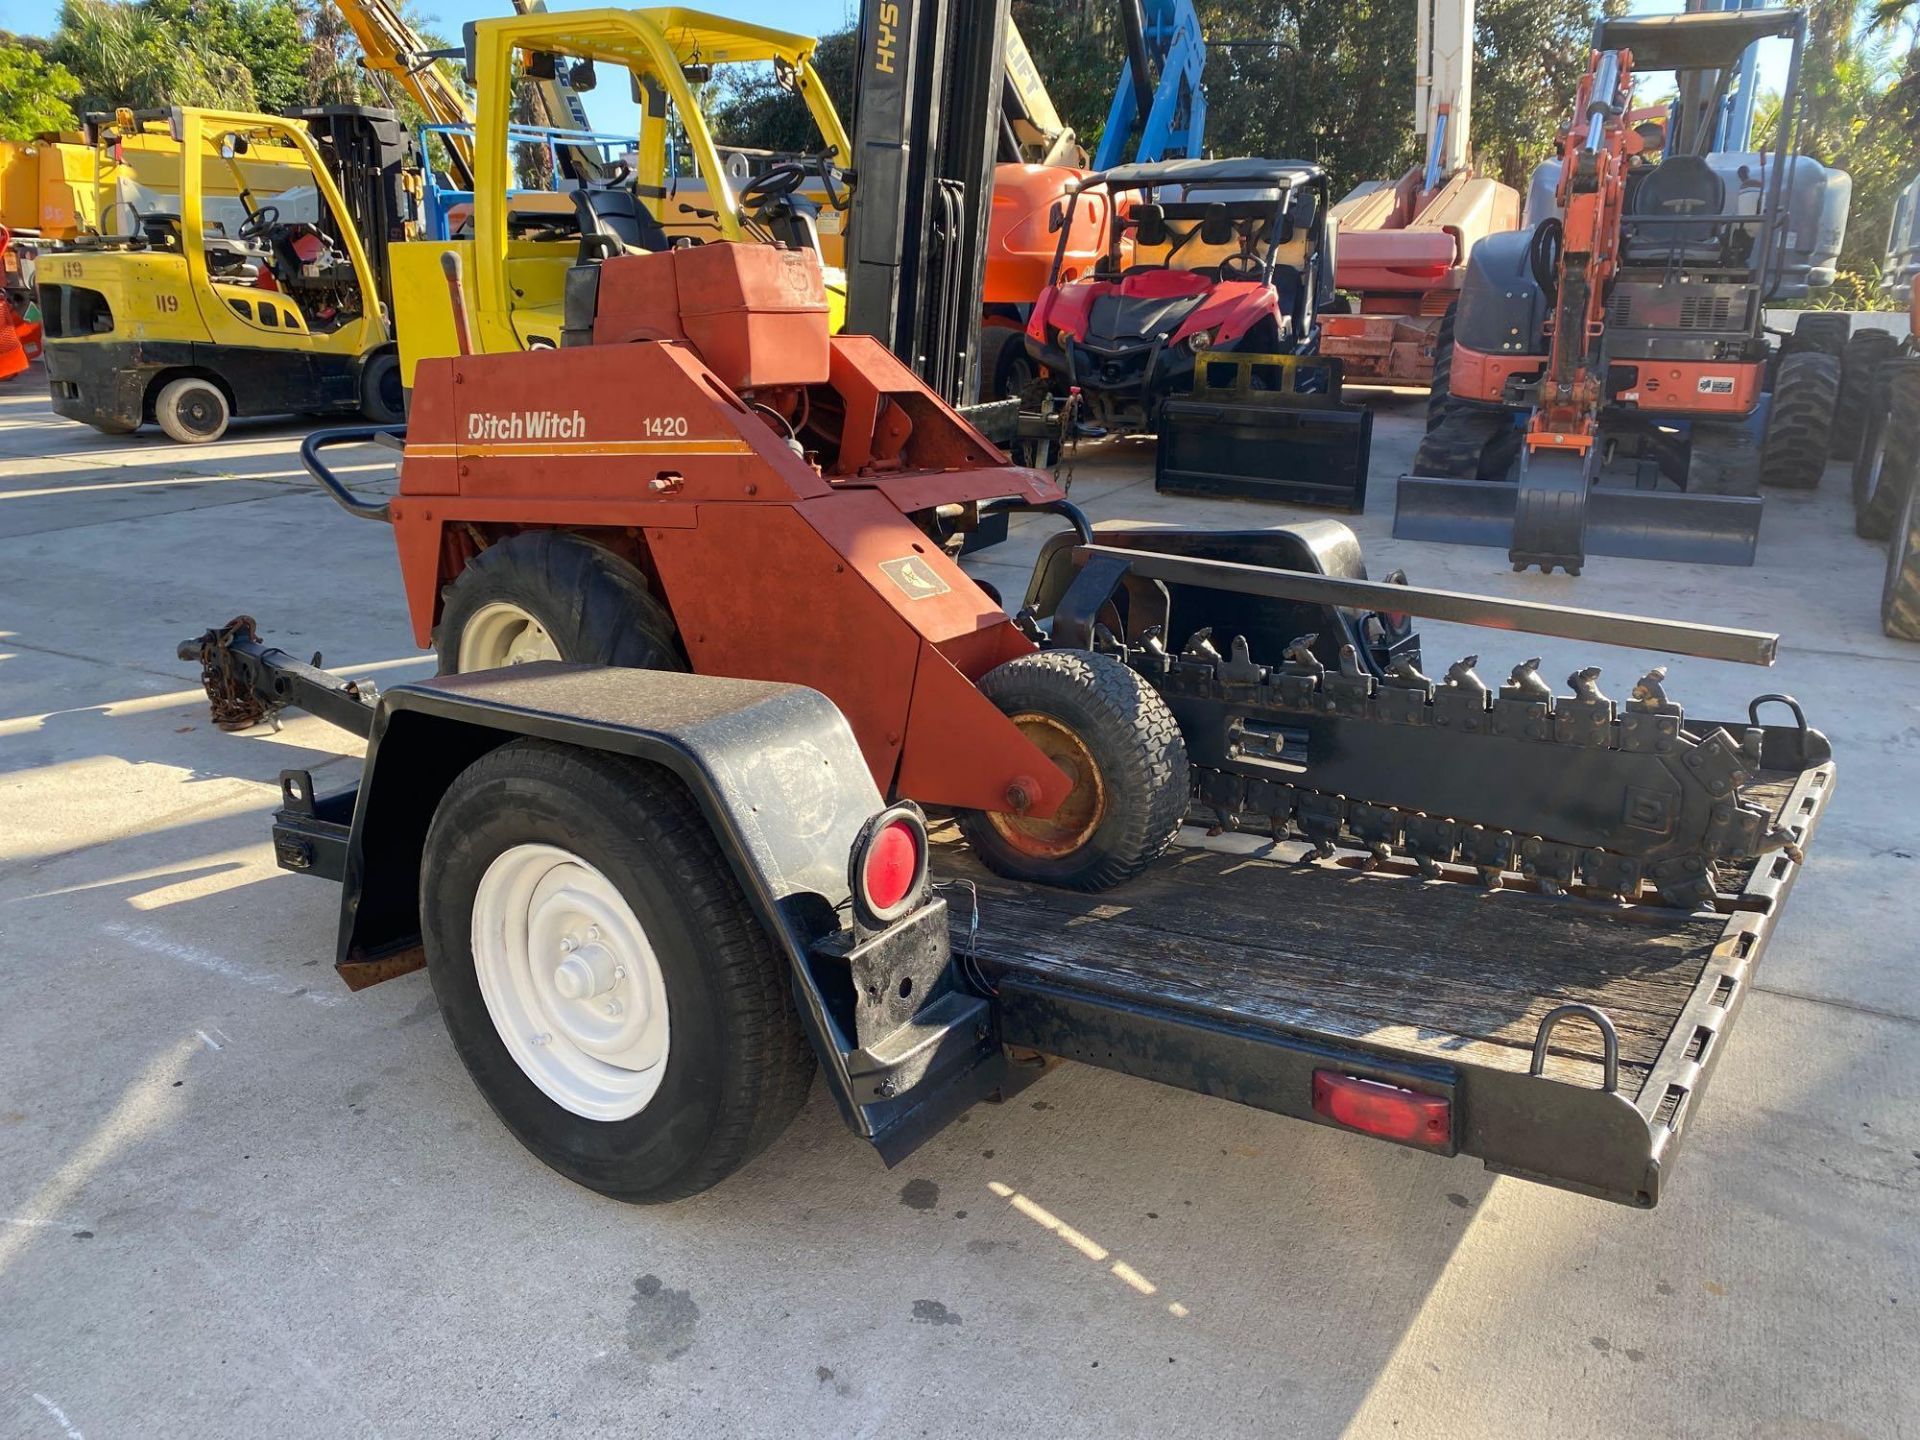 DITCH WITCH 1420 RUBBER TIRED TRENCHER WITH SUPPORT TRAILER, RUNS AND OPERATES*BILL OF SALE ON TRAIL